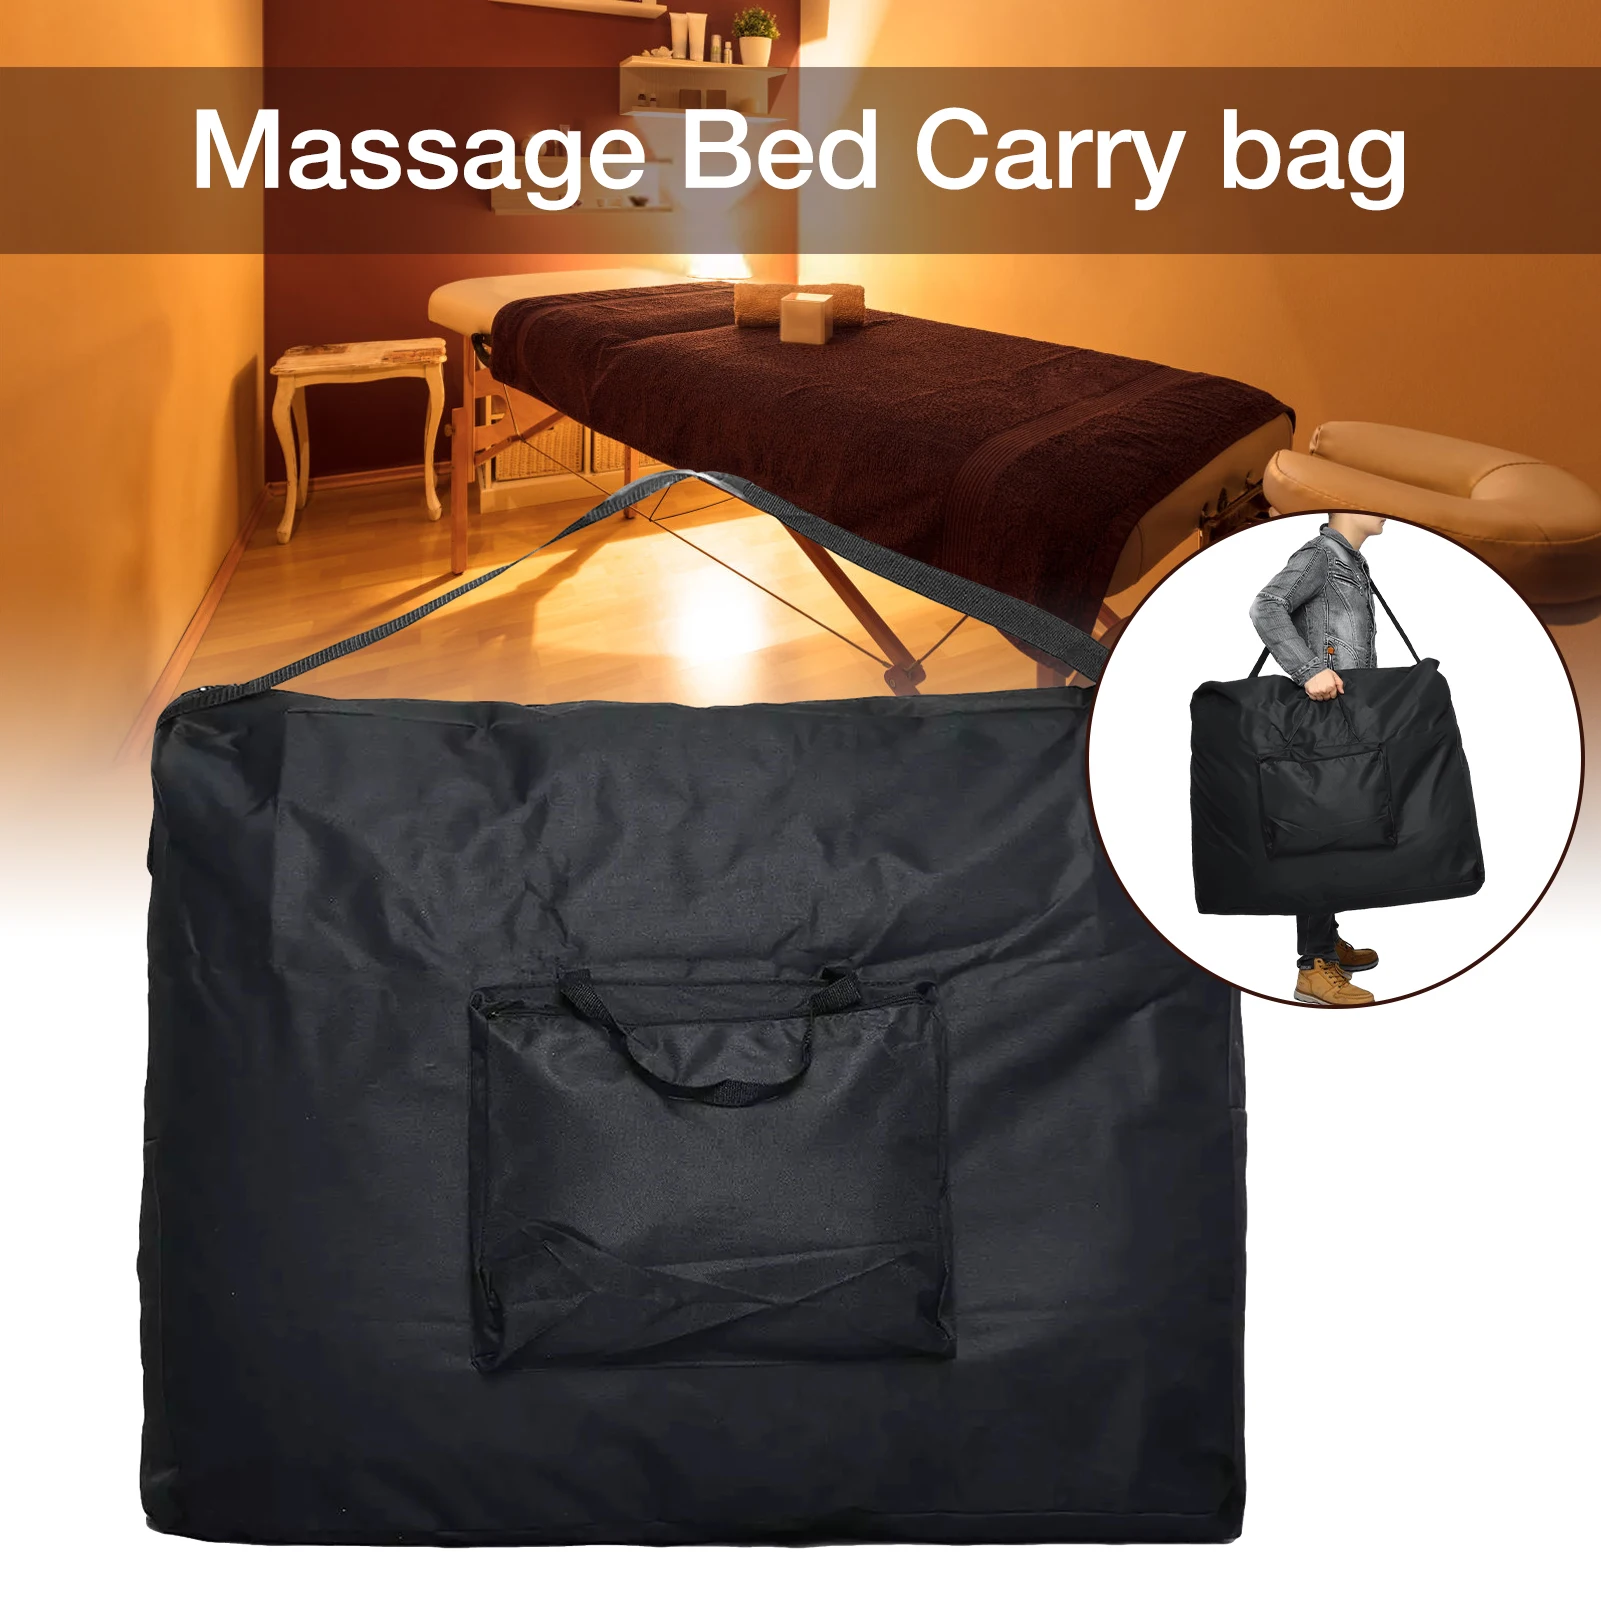 Massage Bag Folding Bag for Massage /bed Beauty Bed Table Carrying Case BagSturdy 600D Oxford Cloth Waterproof Backpack 94*73*18